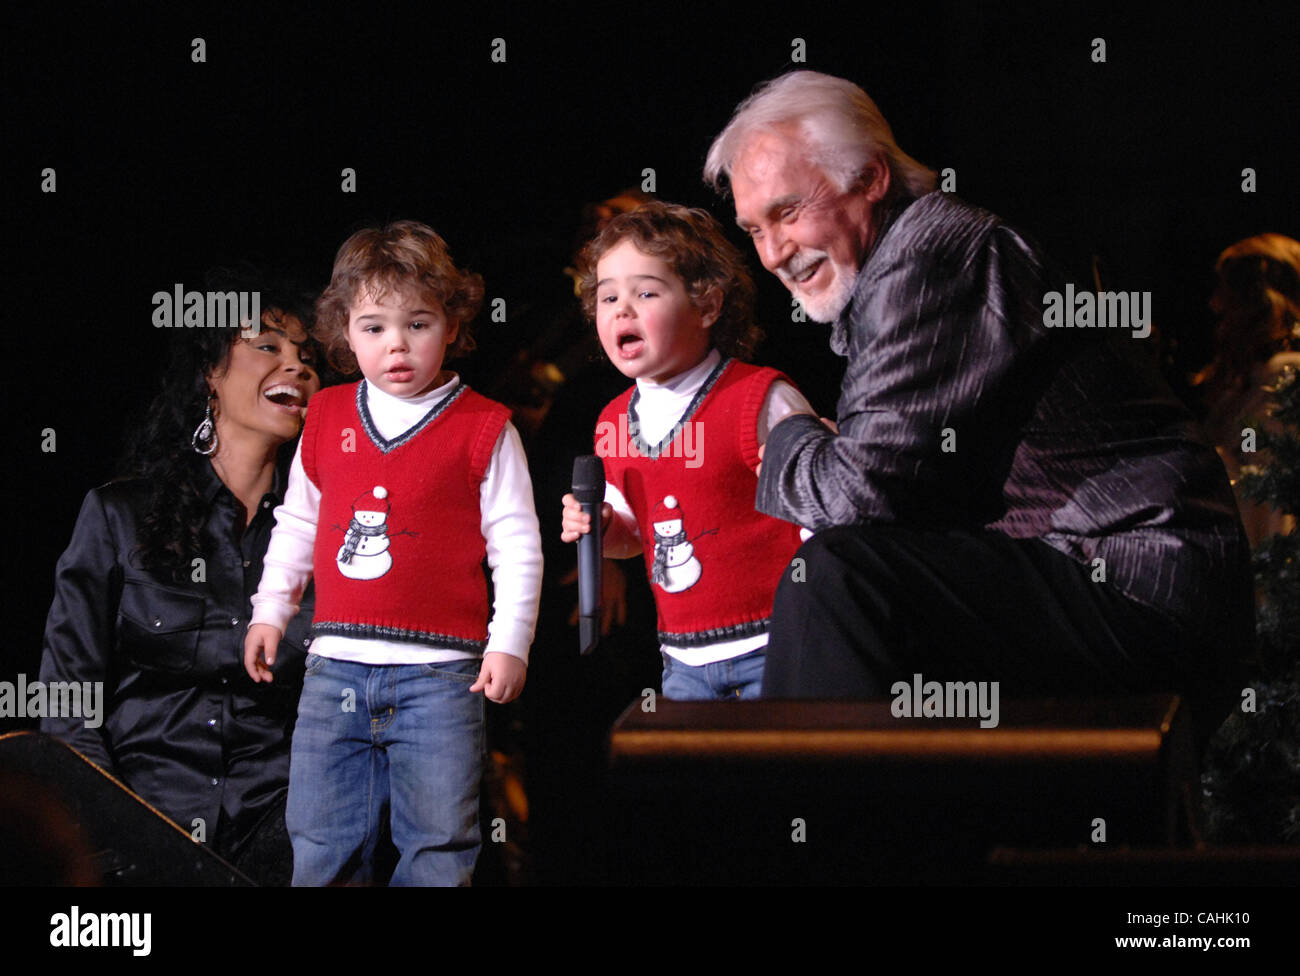 Dec. 6, 2007 - Fayetteville, North Carolina, USA - Legendary Singer KENNY  ROGERS is visited by his wife WANDA ROGERS and there identical twin boys  JUSTIN CHARLES ROGERS and JORDAN EDWARD ROGERS